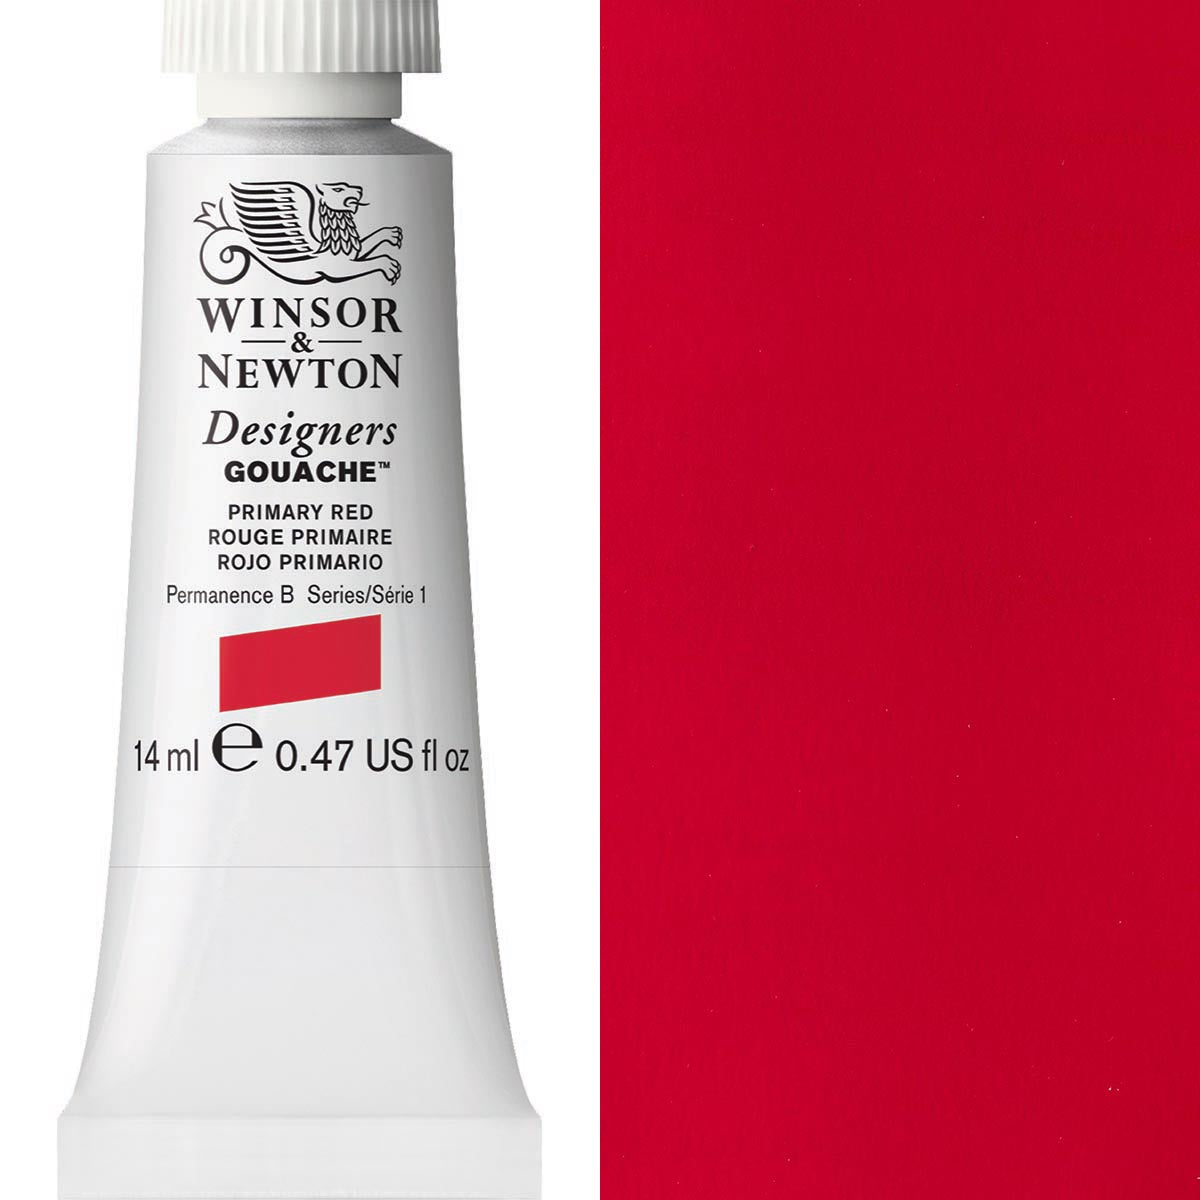 Winsor and Newton - Designers Gouache - 14ml - Primary Red